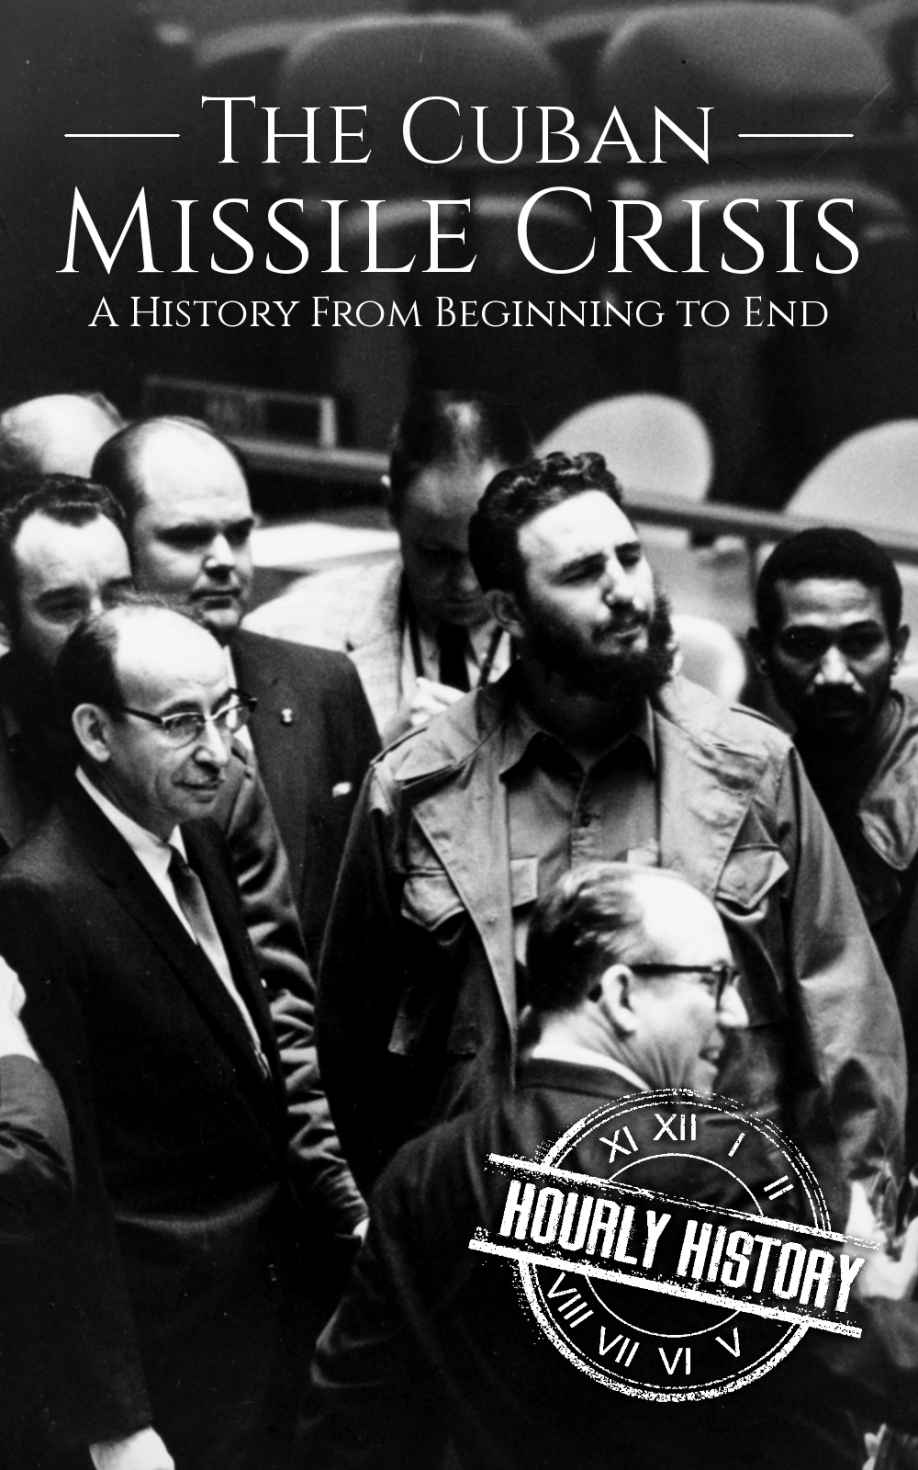 The Cuban Missile Crisis: A History From Beginning to End